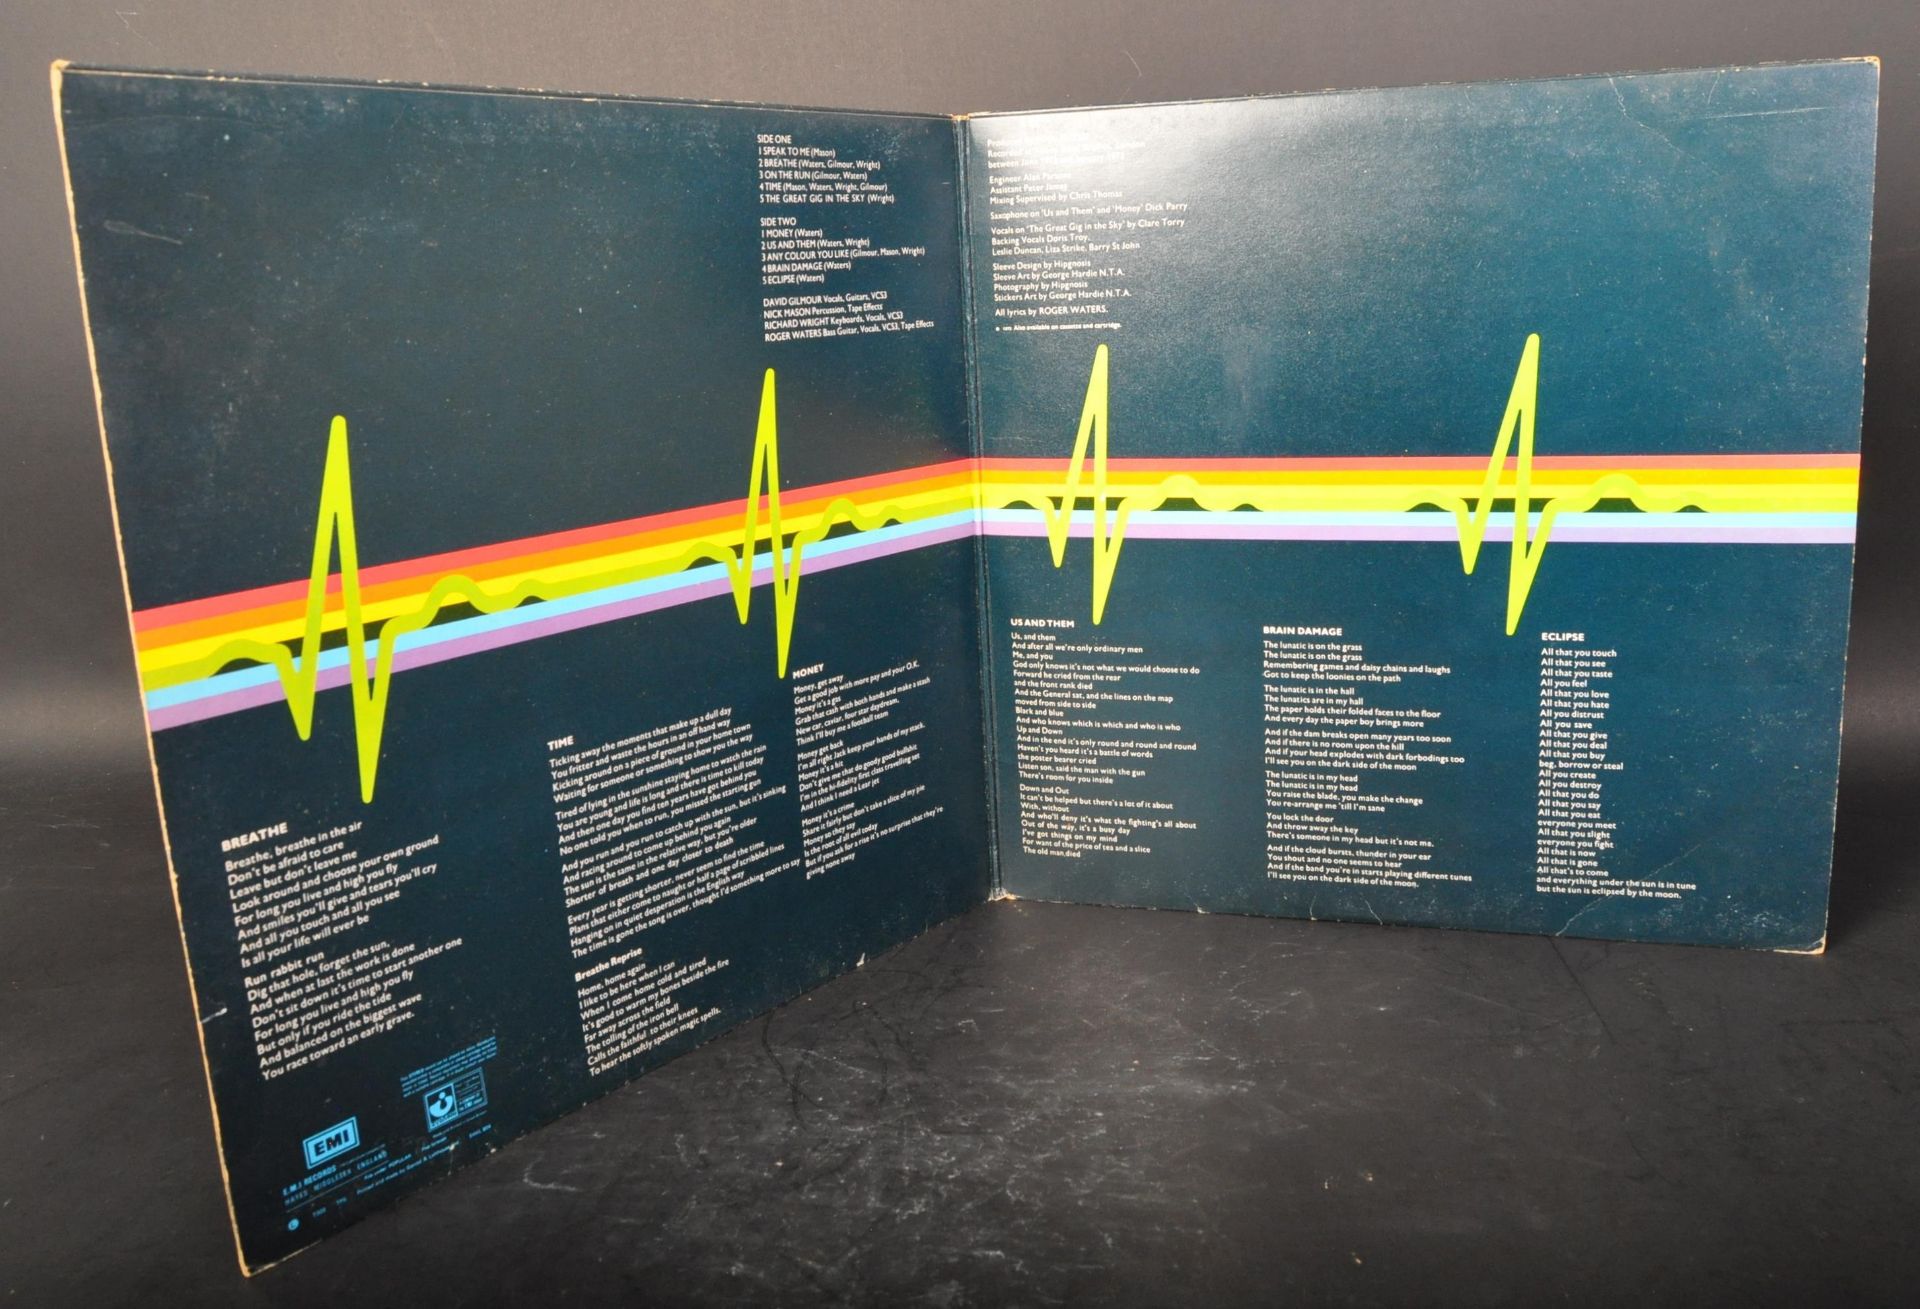 PINK FLOYD - DARK SIDE OF THE MOON - FIRST PRESSING - VINYL RECORD - Image 2 of 5